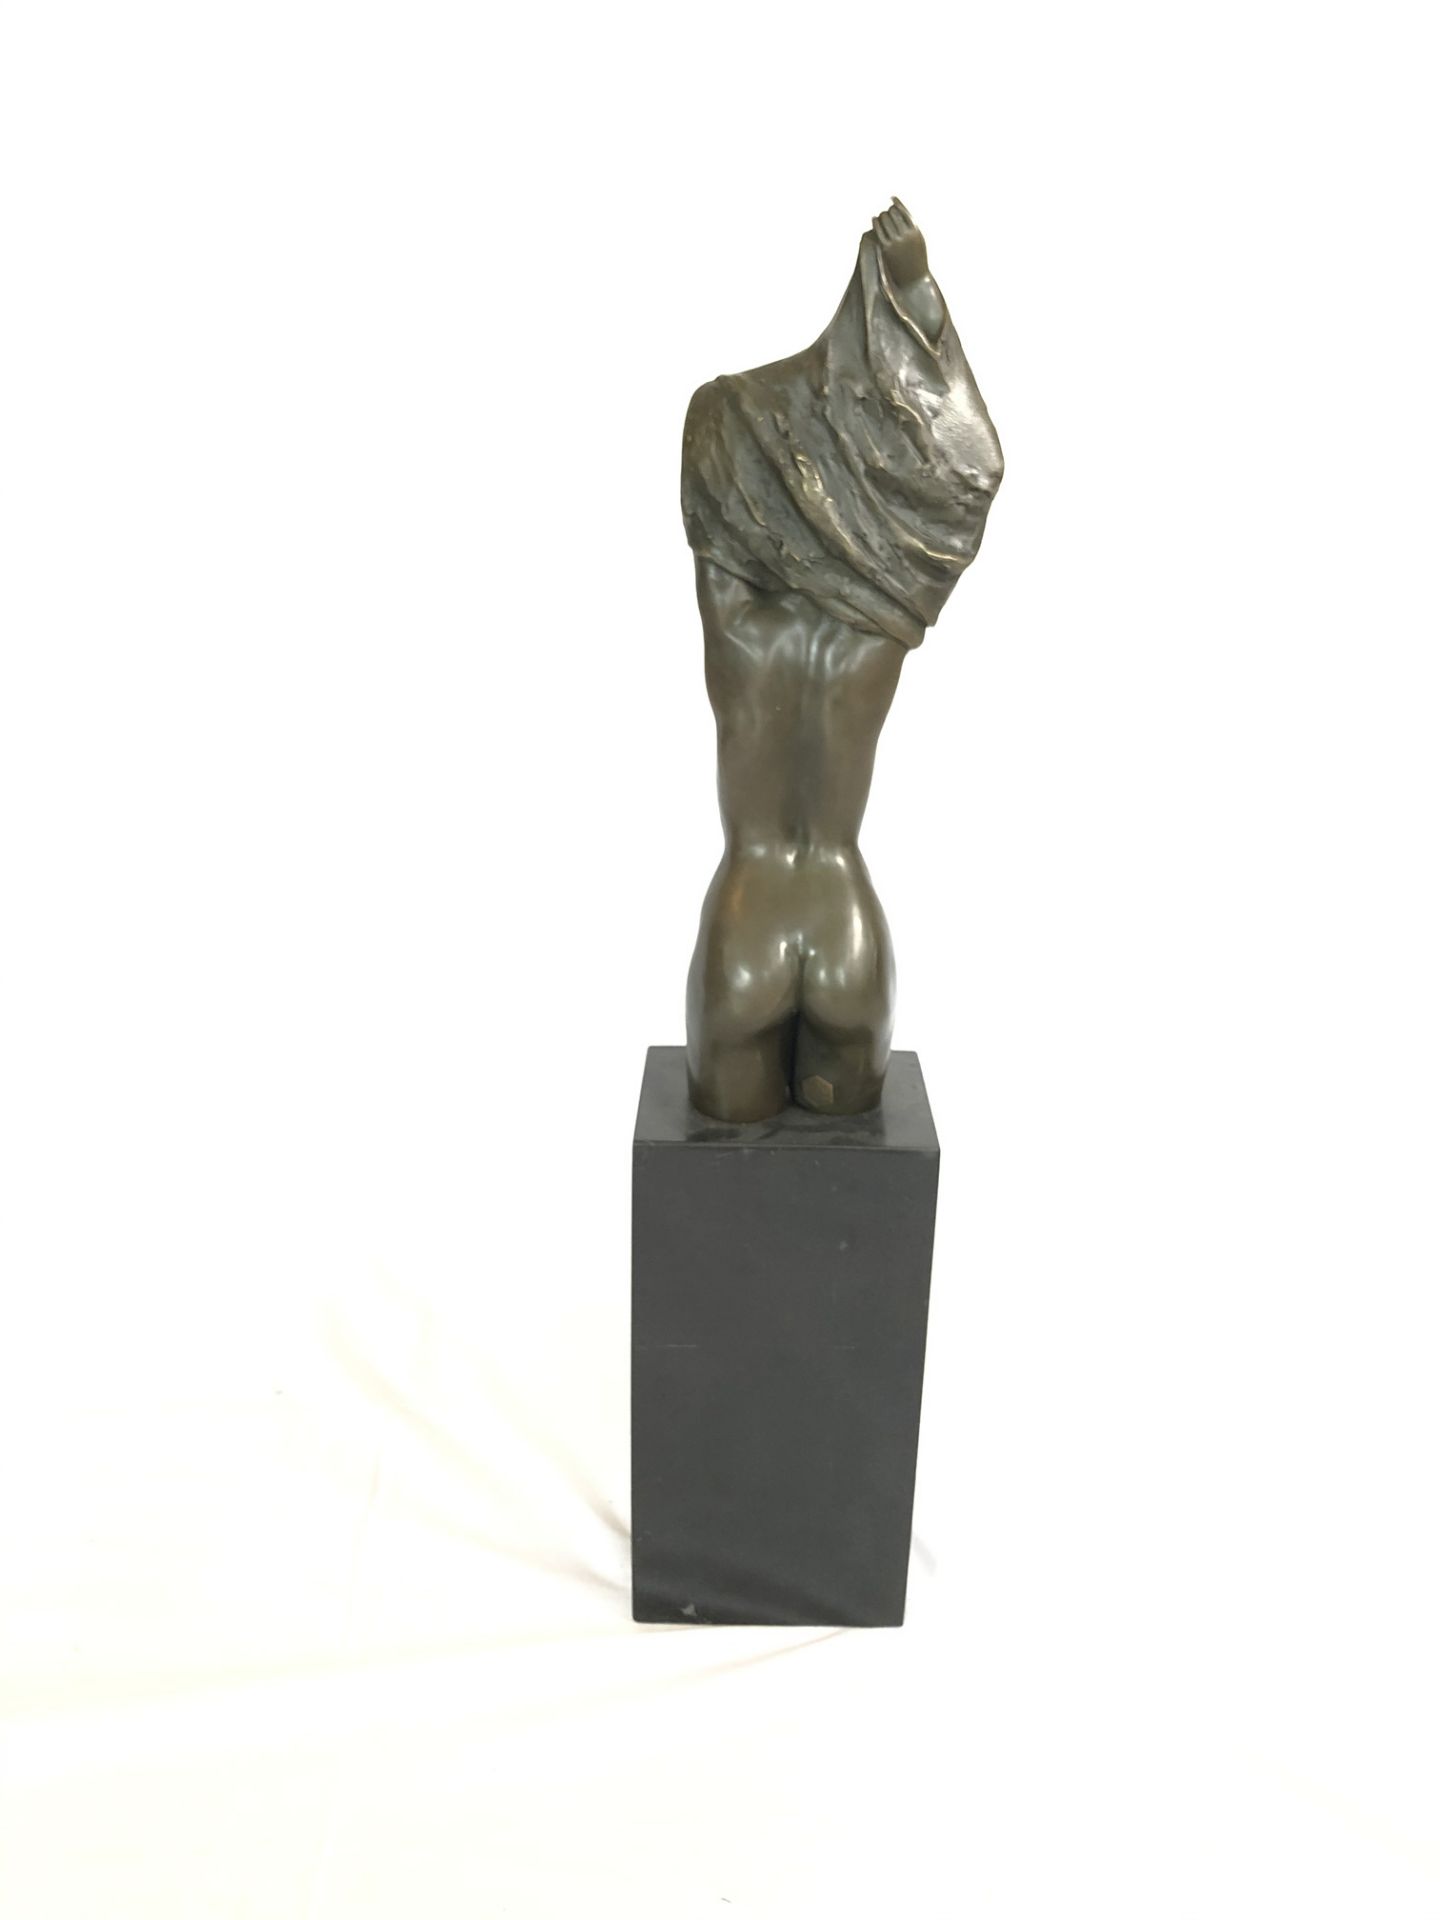 Bronze statue of a woman by artist J. Patoue - Image 5 of 9